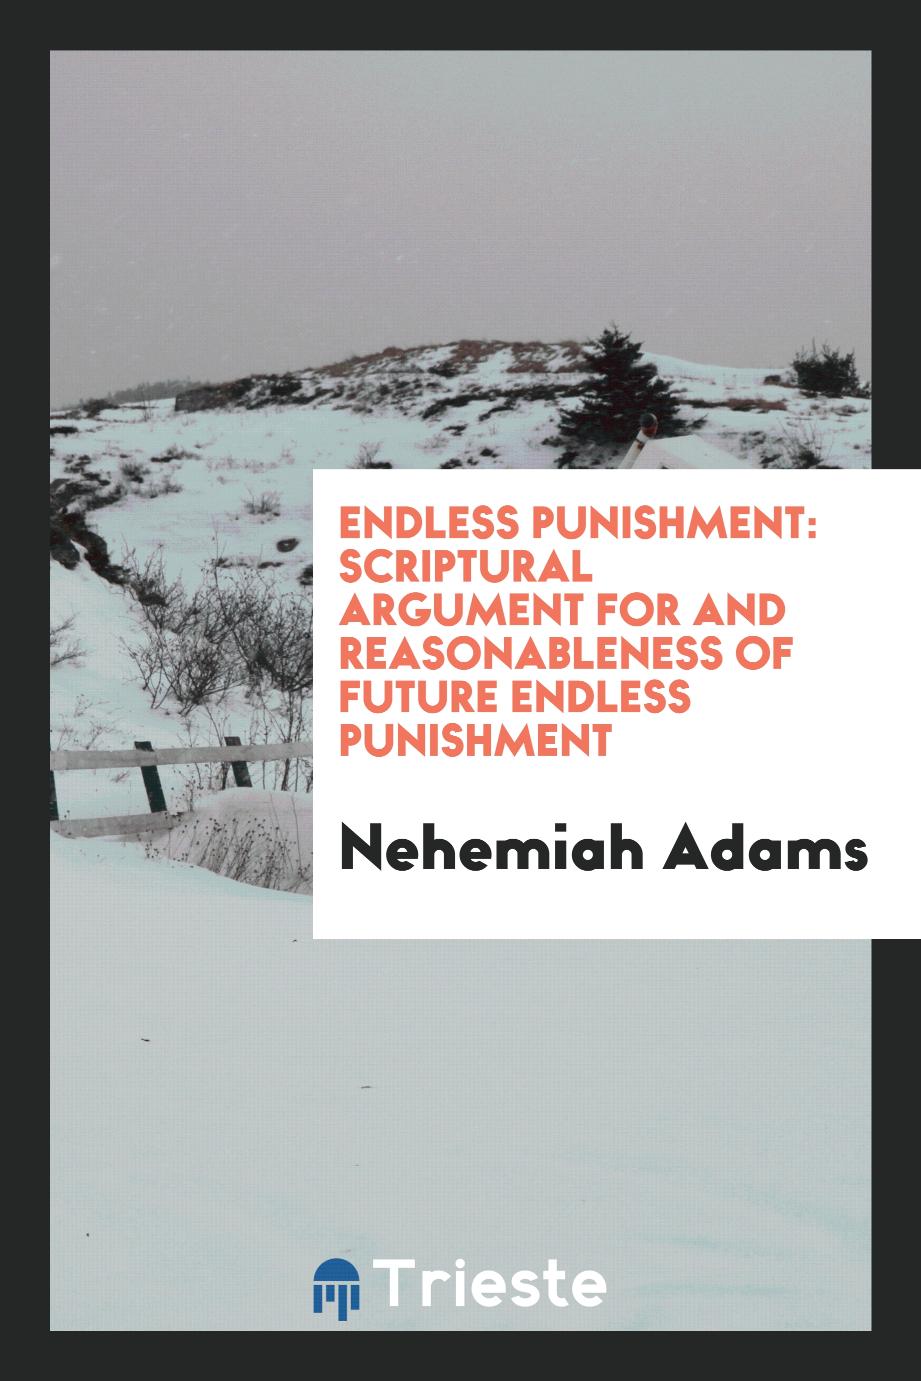 Endless Punishment: Scriptural Argument for and Reasonableness of Future Endless Punishment